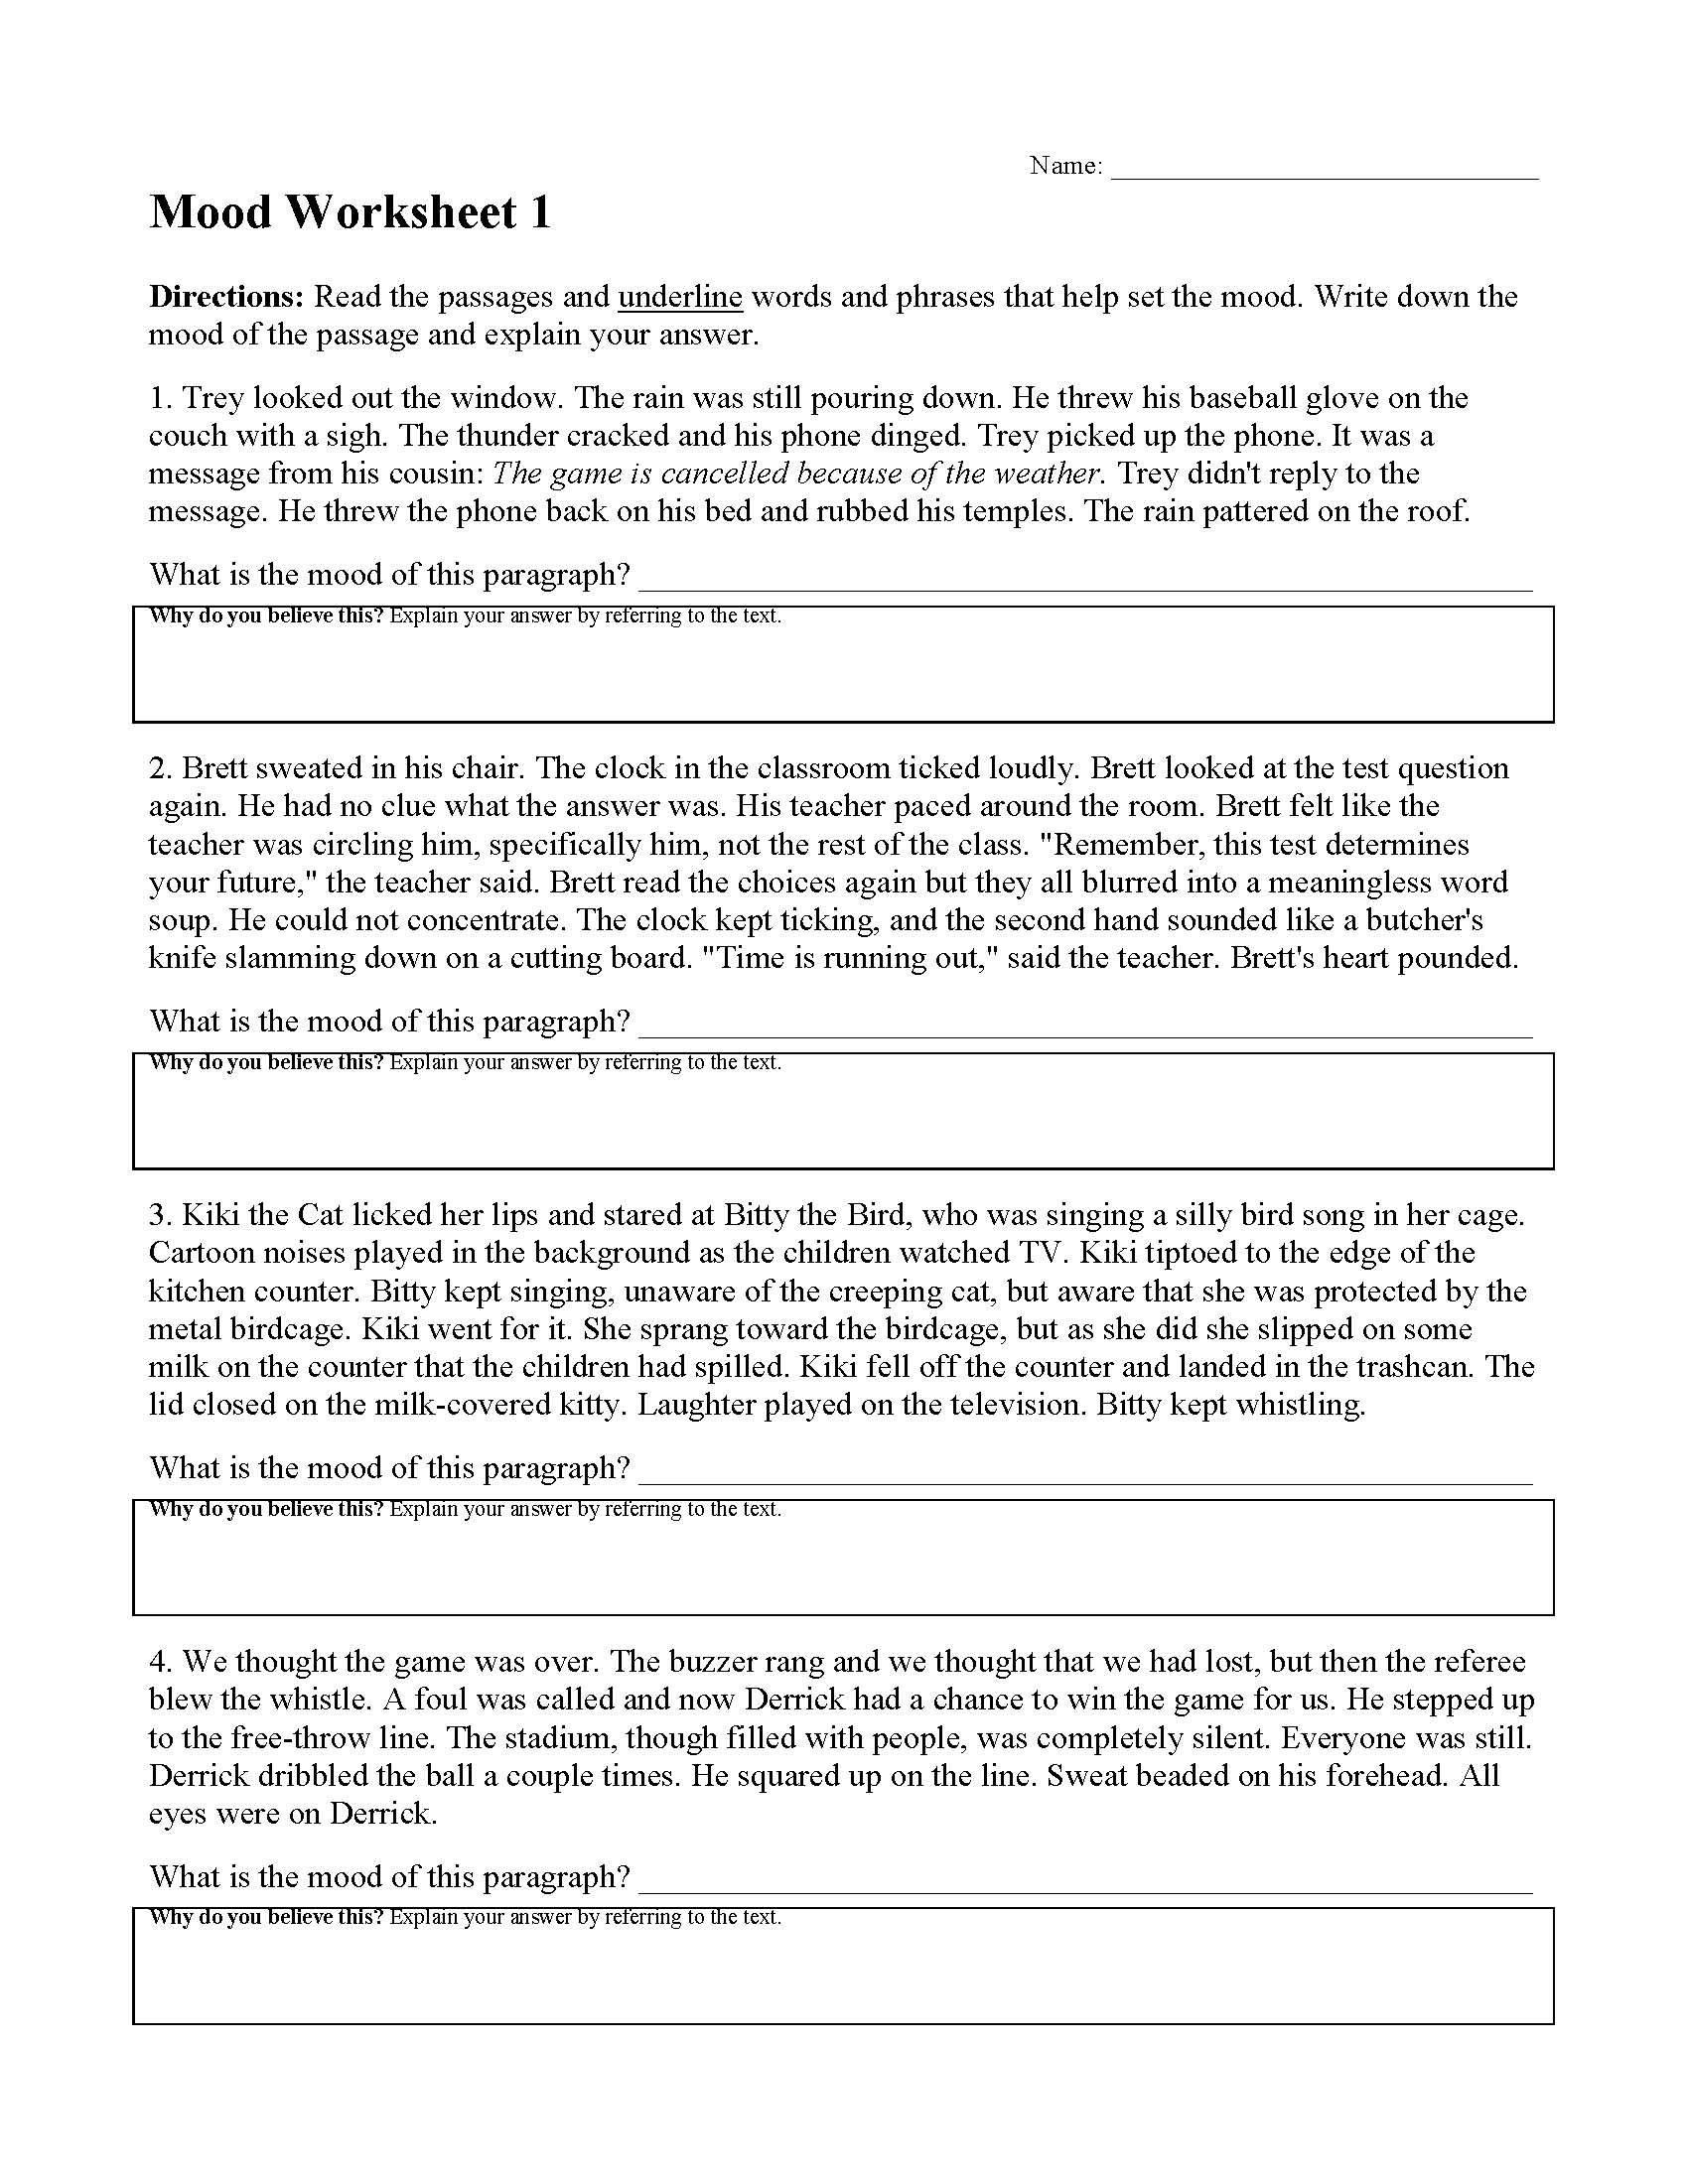 This is a preview image of Mood Worksheet 1. Click on it to enlarge it or view the source file.